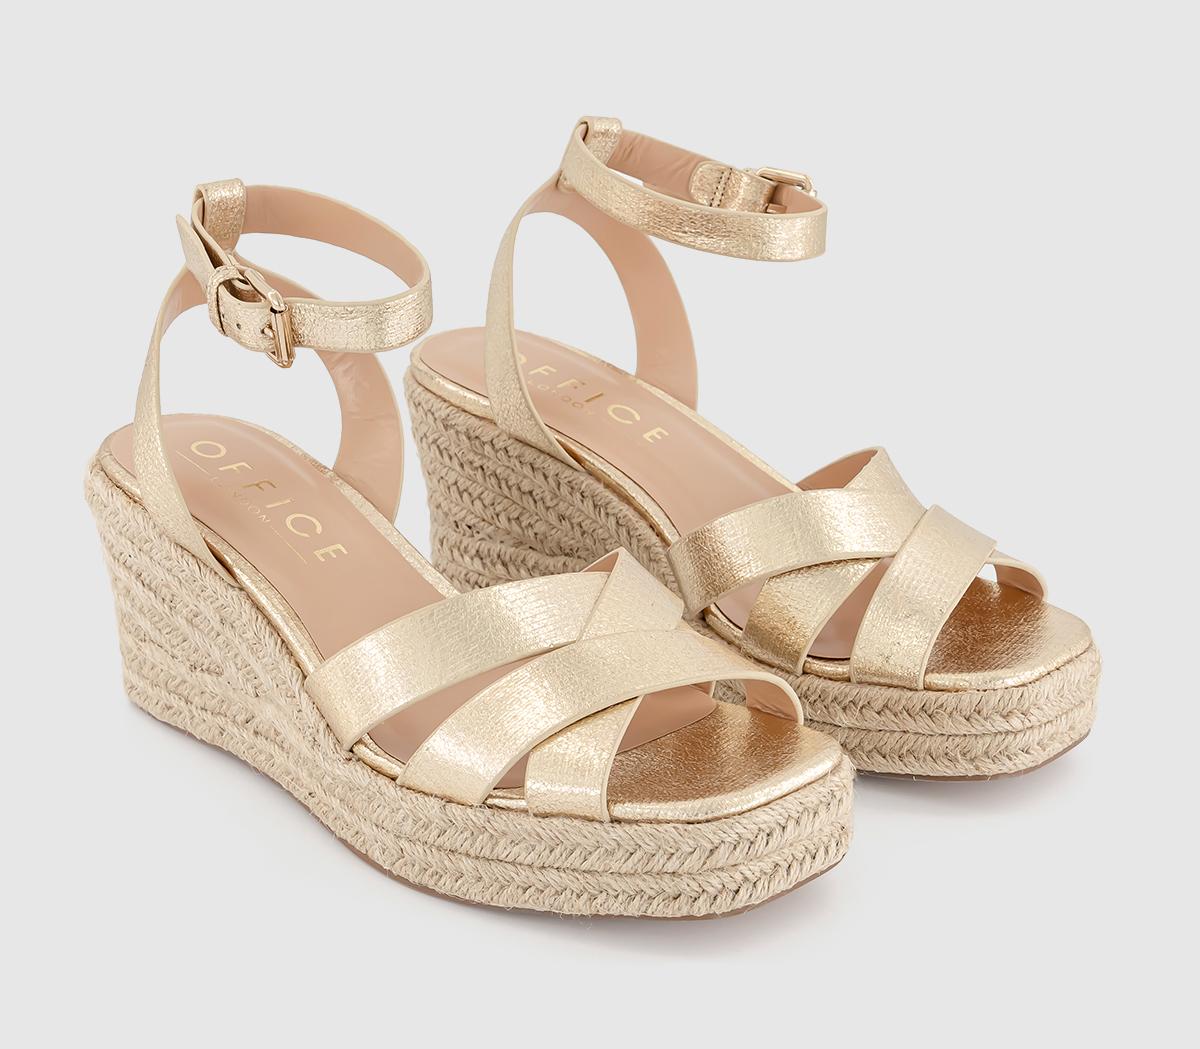 OFFICE Womens Martina Multi Strap Mid Espadrille Wedges Gold, 8